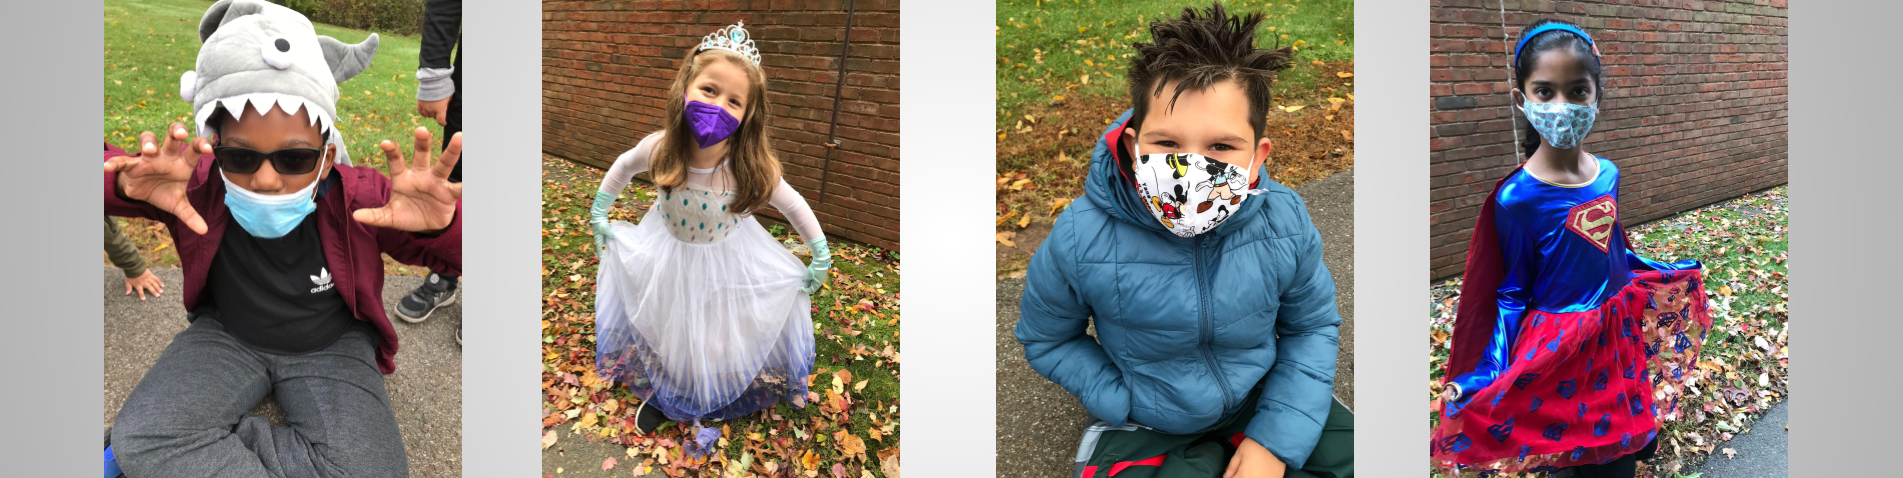 West Hill students show off their Halloween costumes